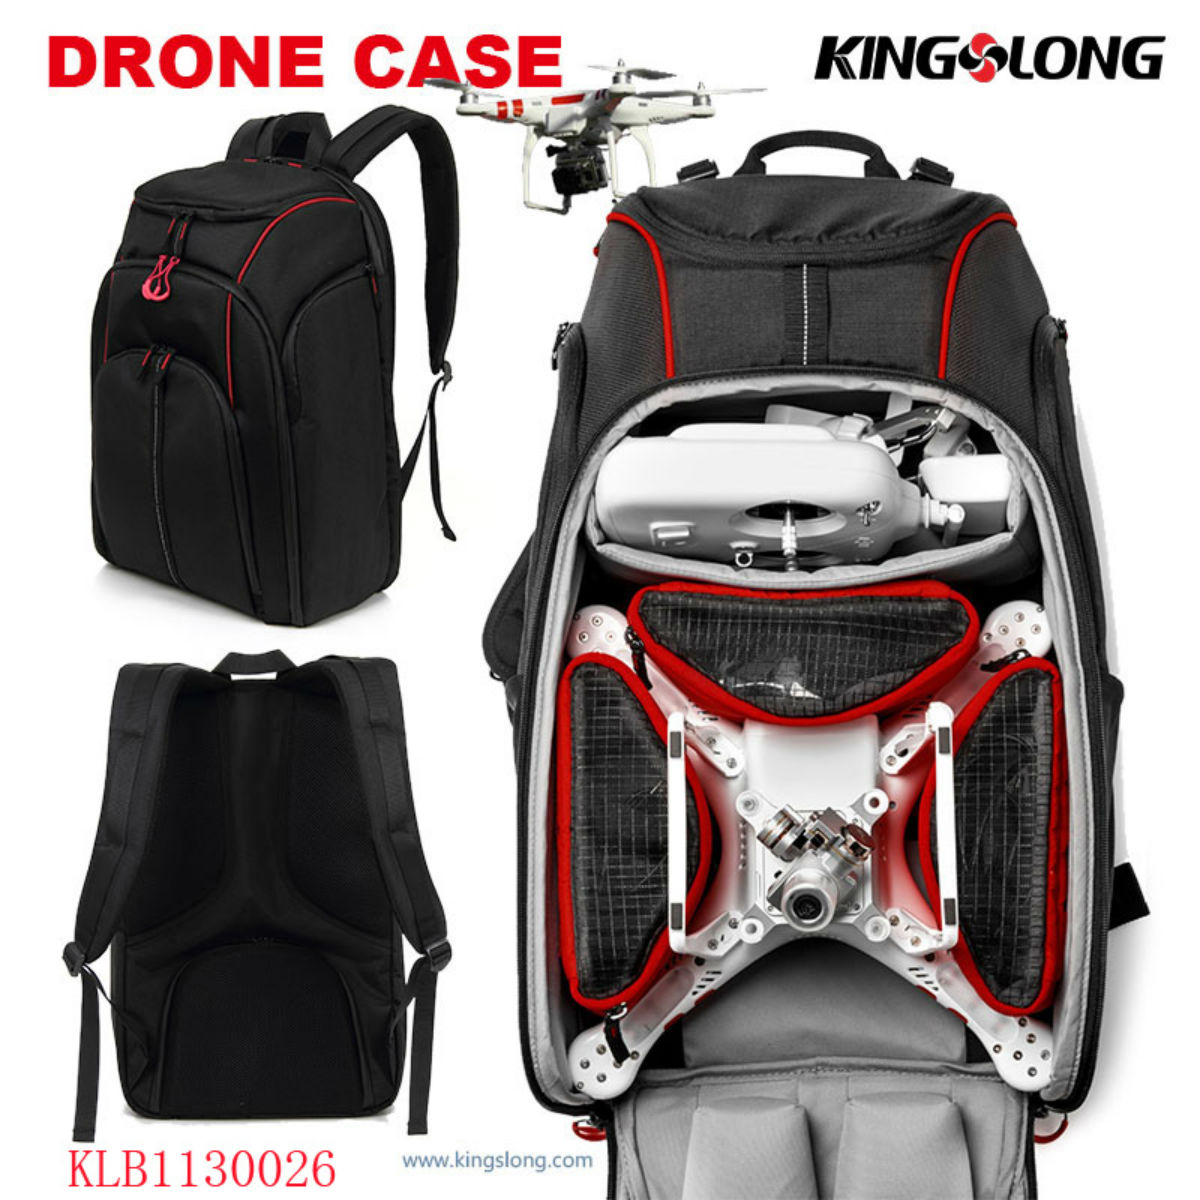 I found the perfect drone bag for my Mavic